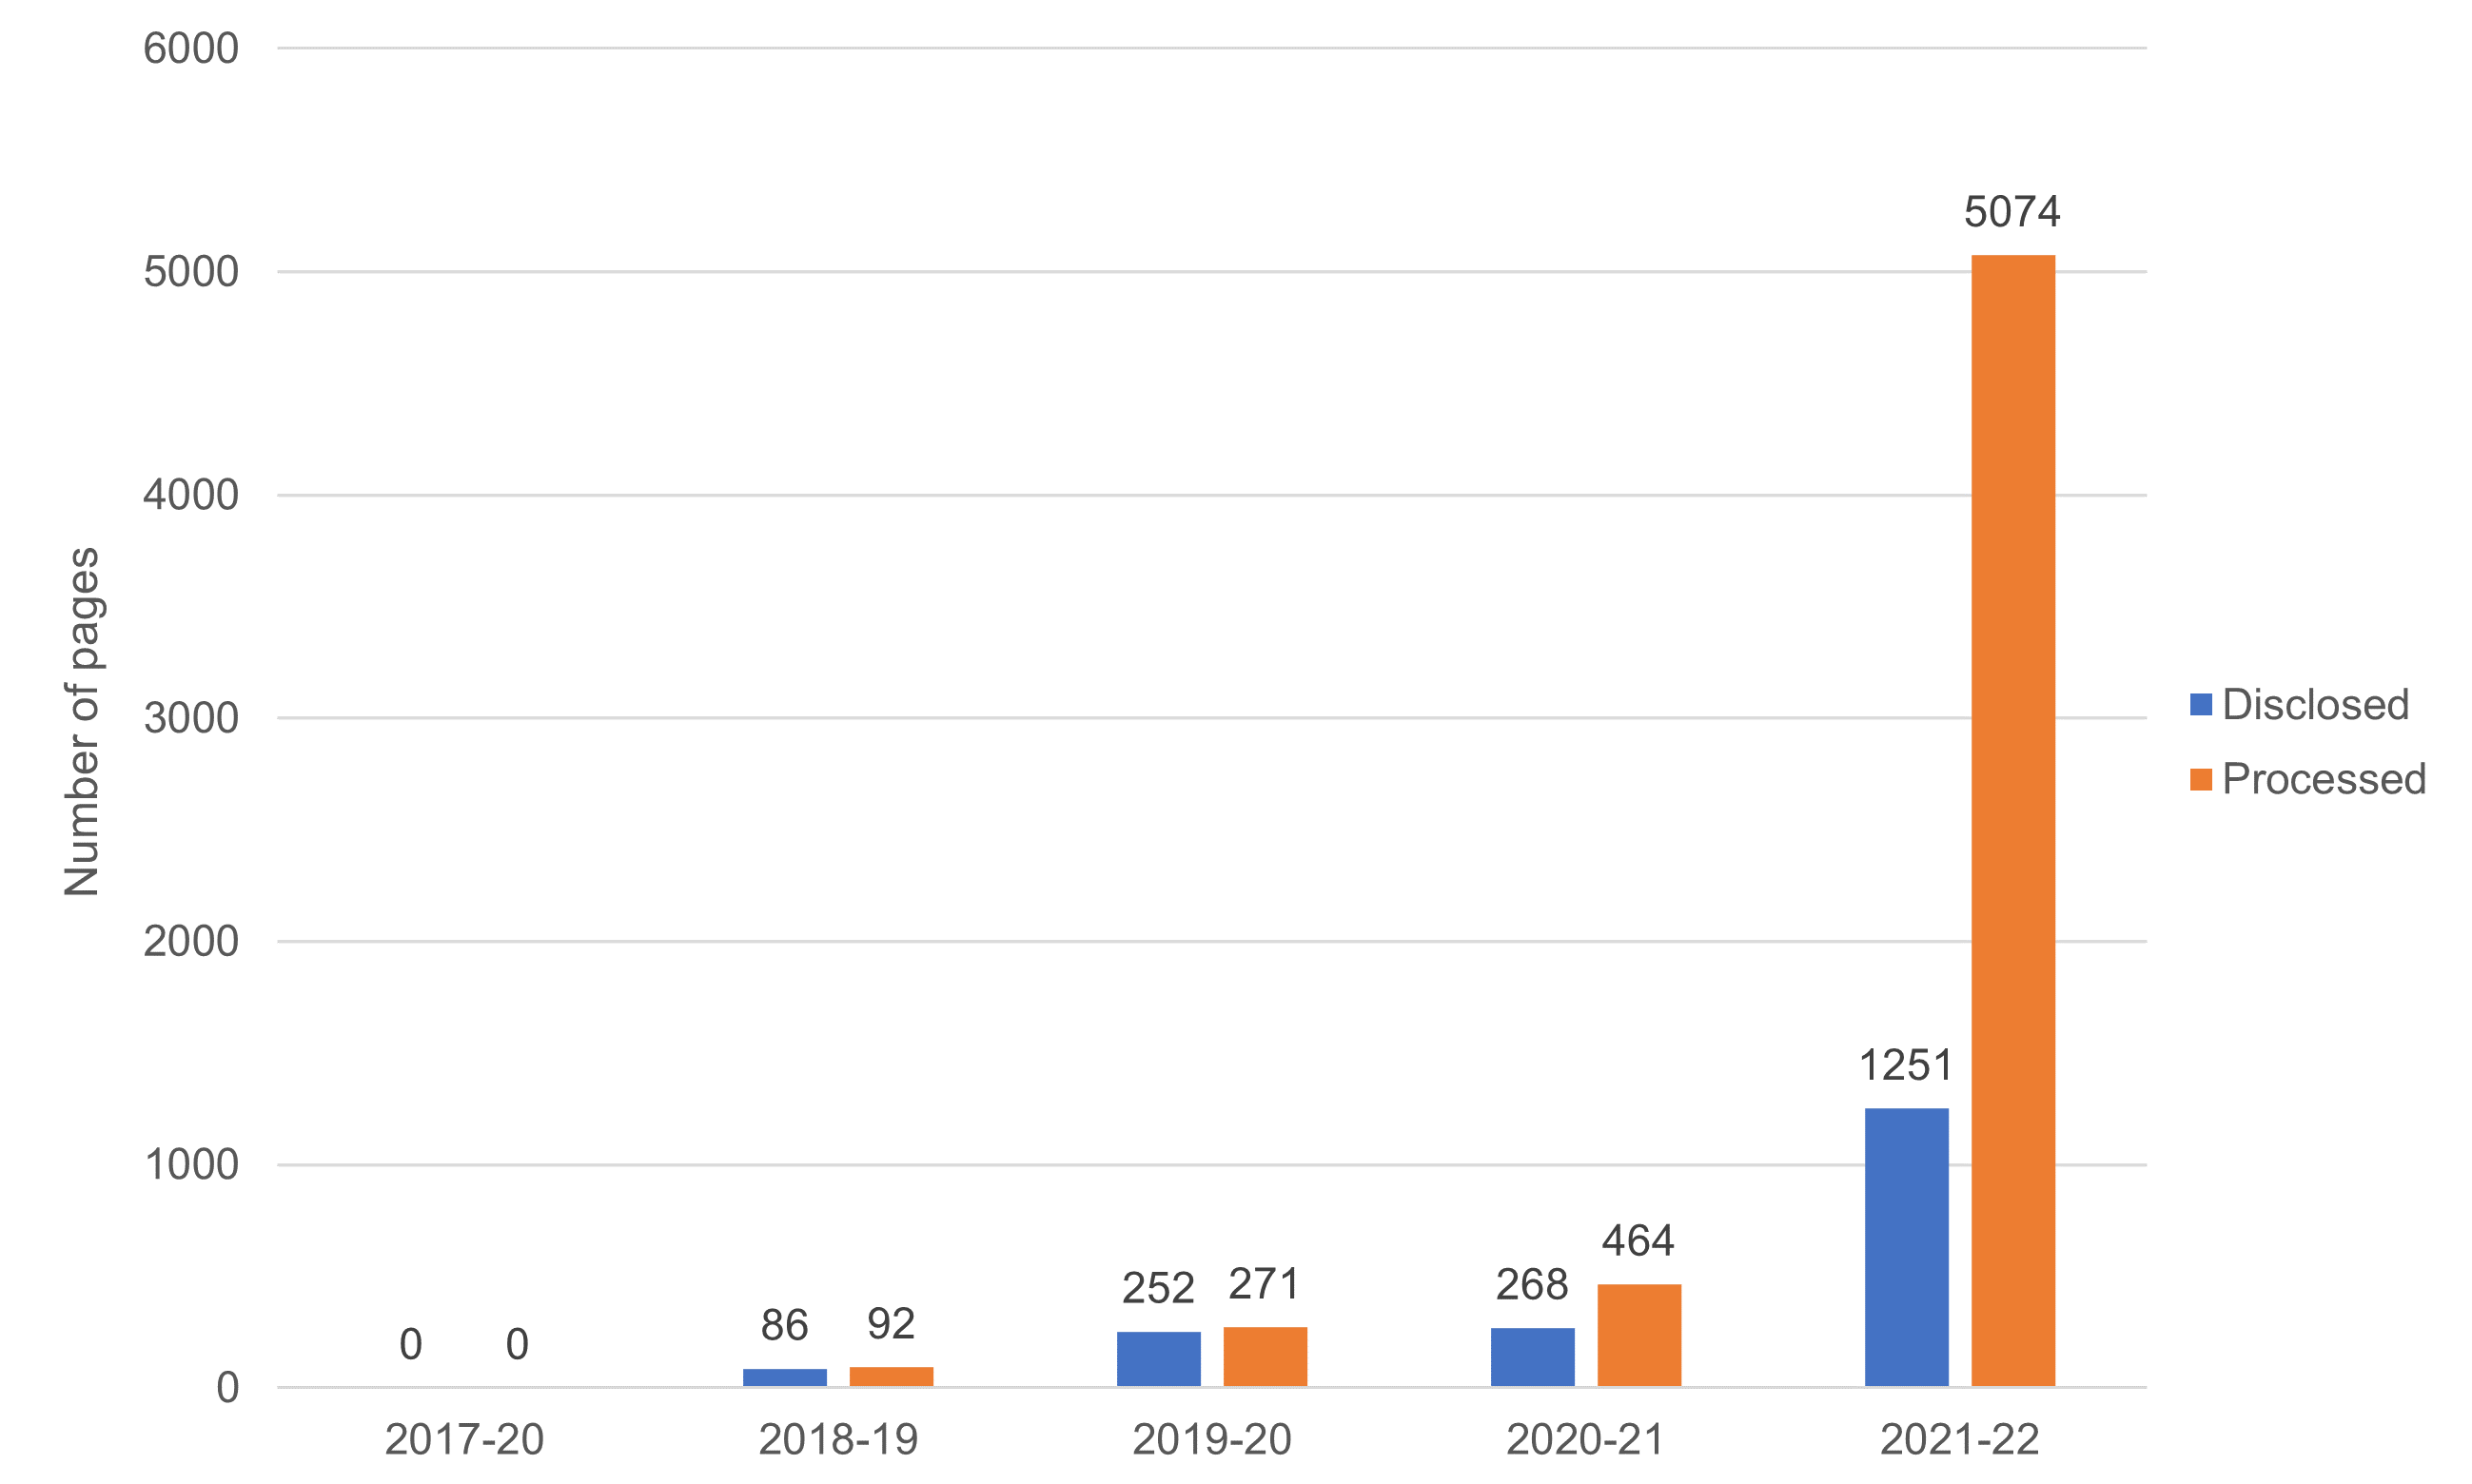 Figure 2: Number of pages processed and pages disclosed from 2017 to 2022